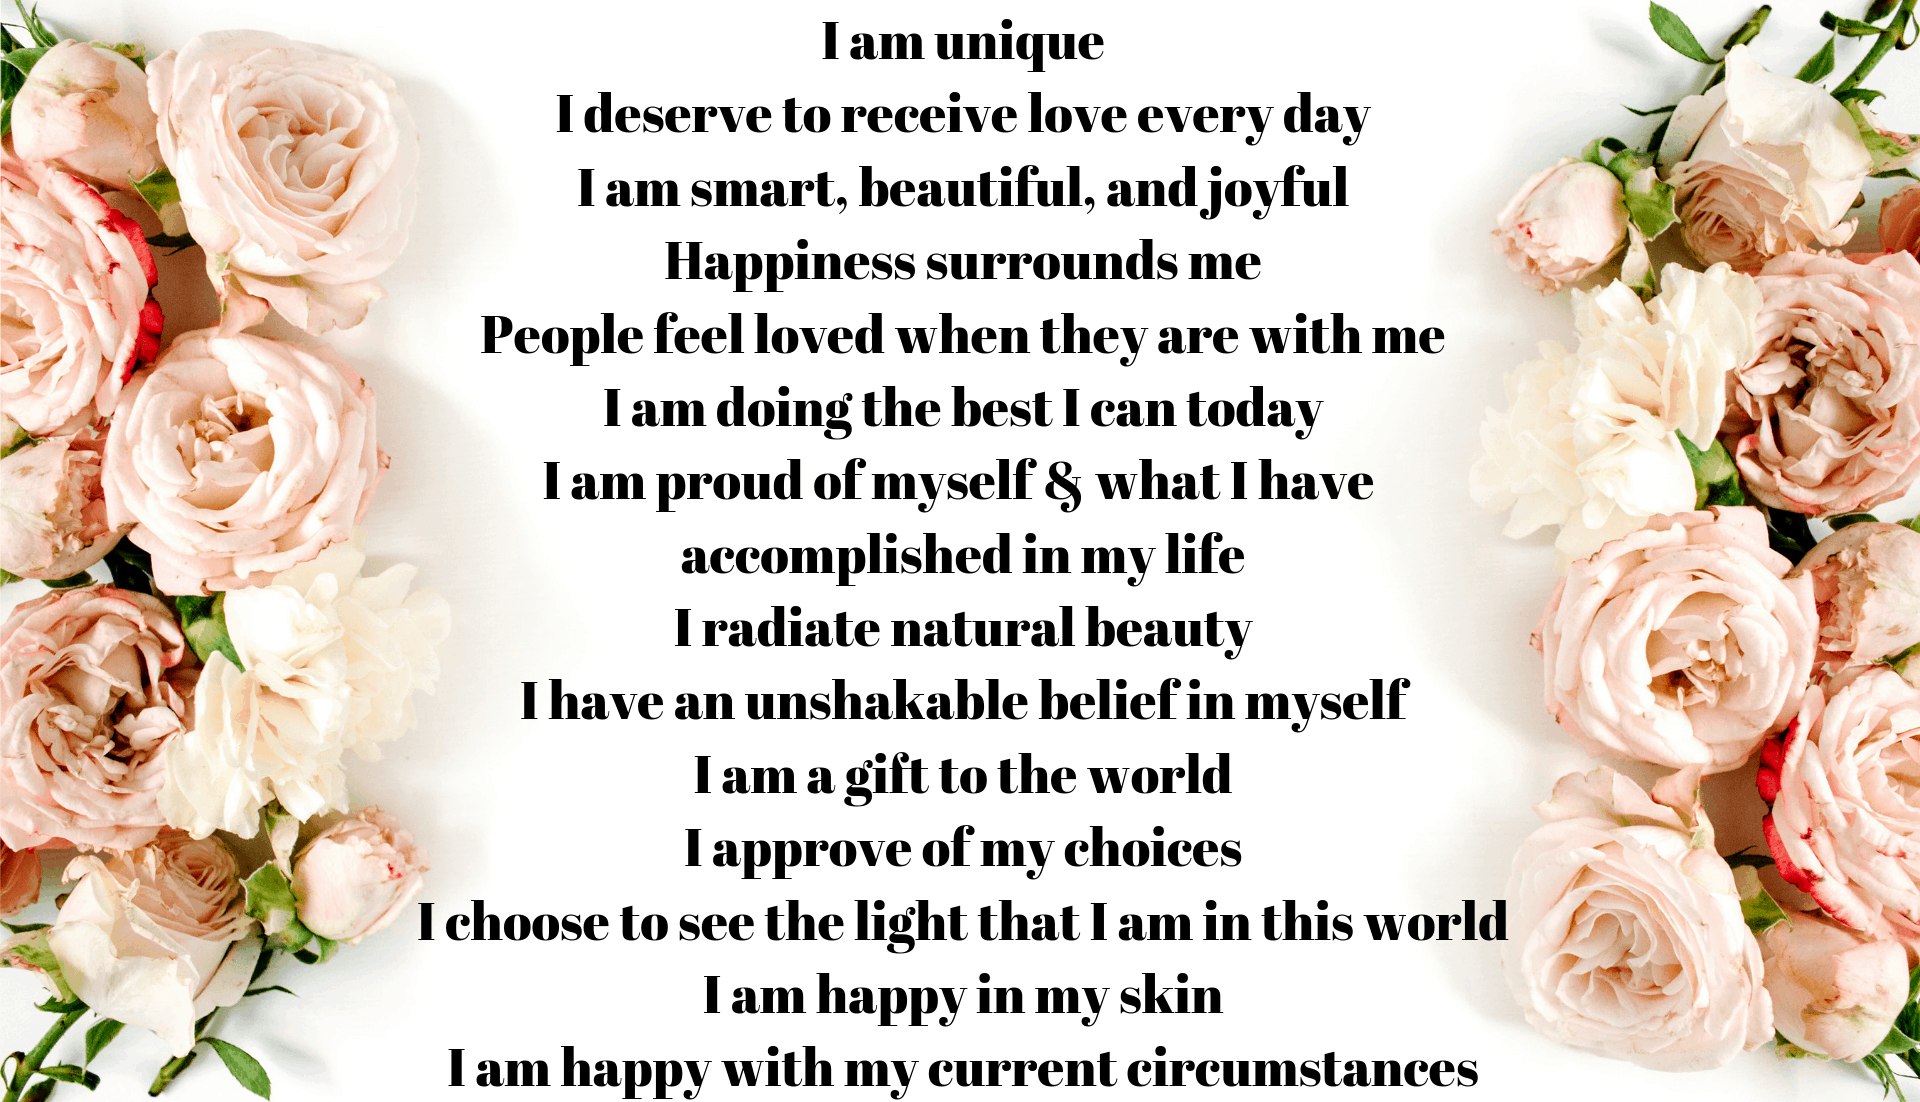 Picture of self-love affirmations.